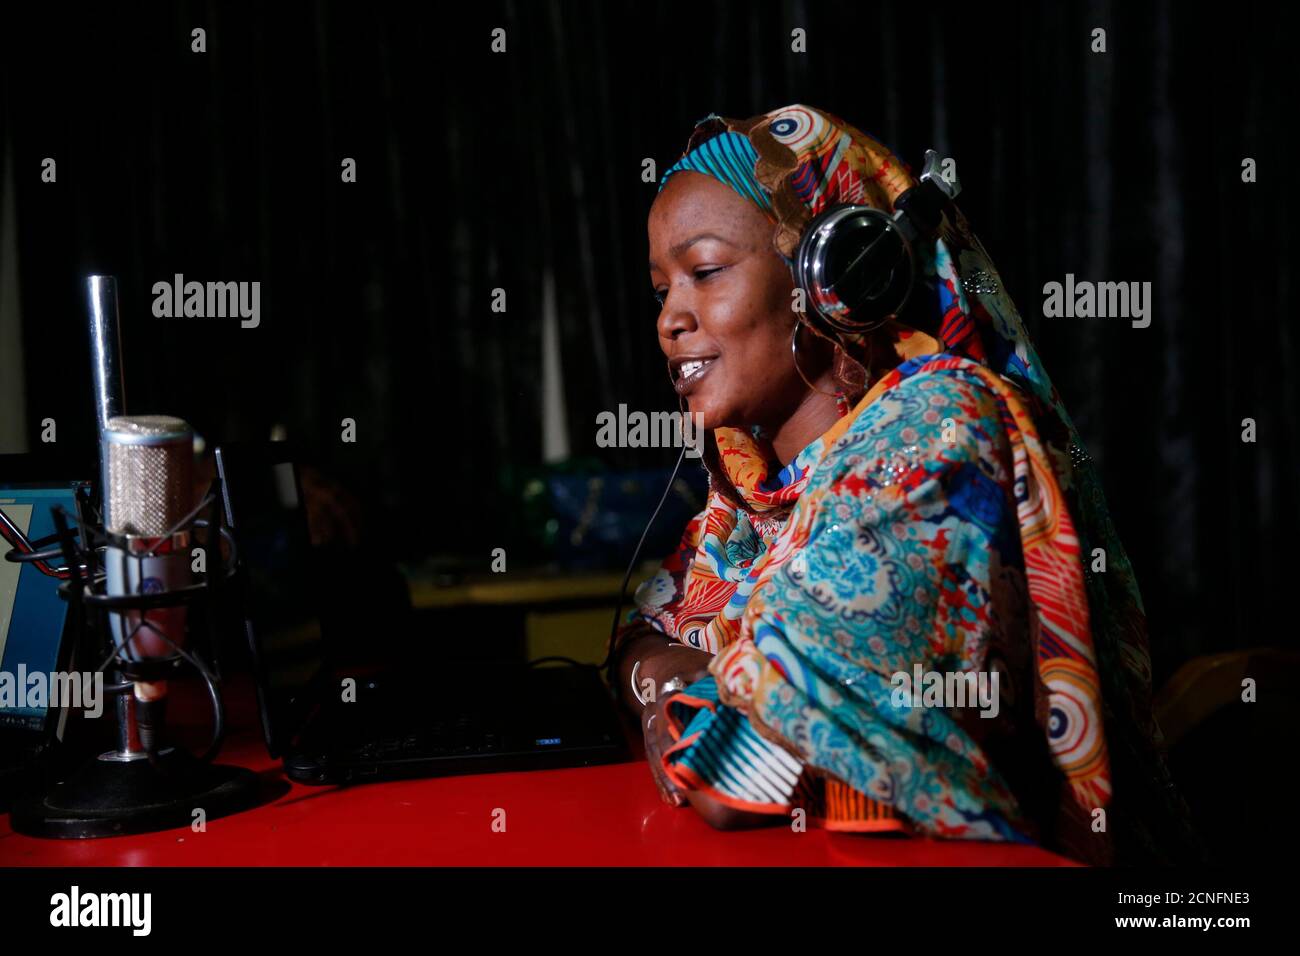 Presenter Halima Abba Ibrahim speaks into a microphone during a shortwave  broadcast for Dandal Kura at a radio station in Nigeria's northern region  of Kano, January 18, 2016. Dandal Kura, Kanuri for "